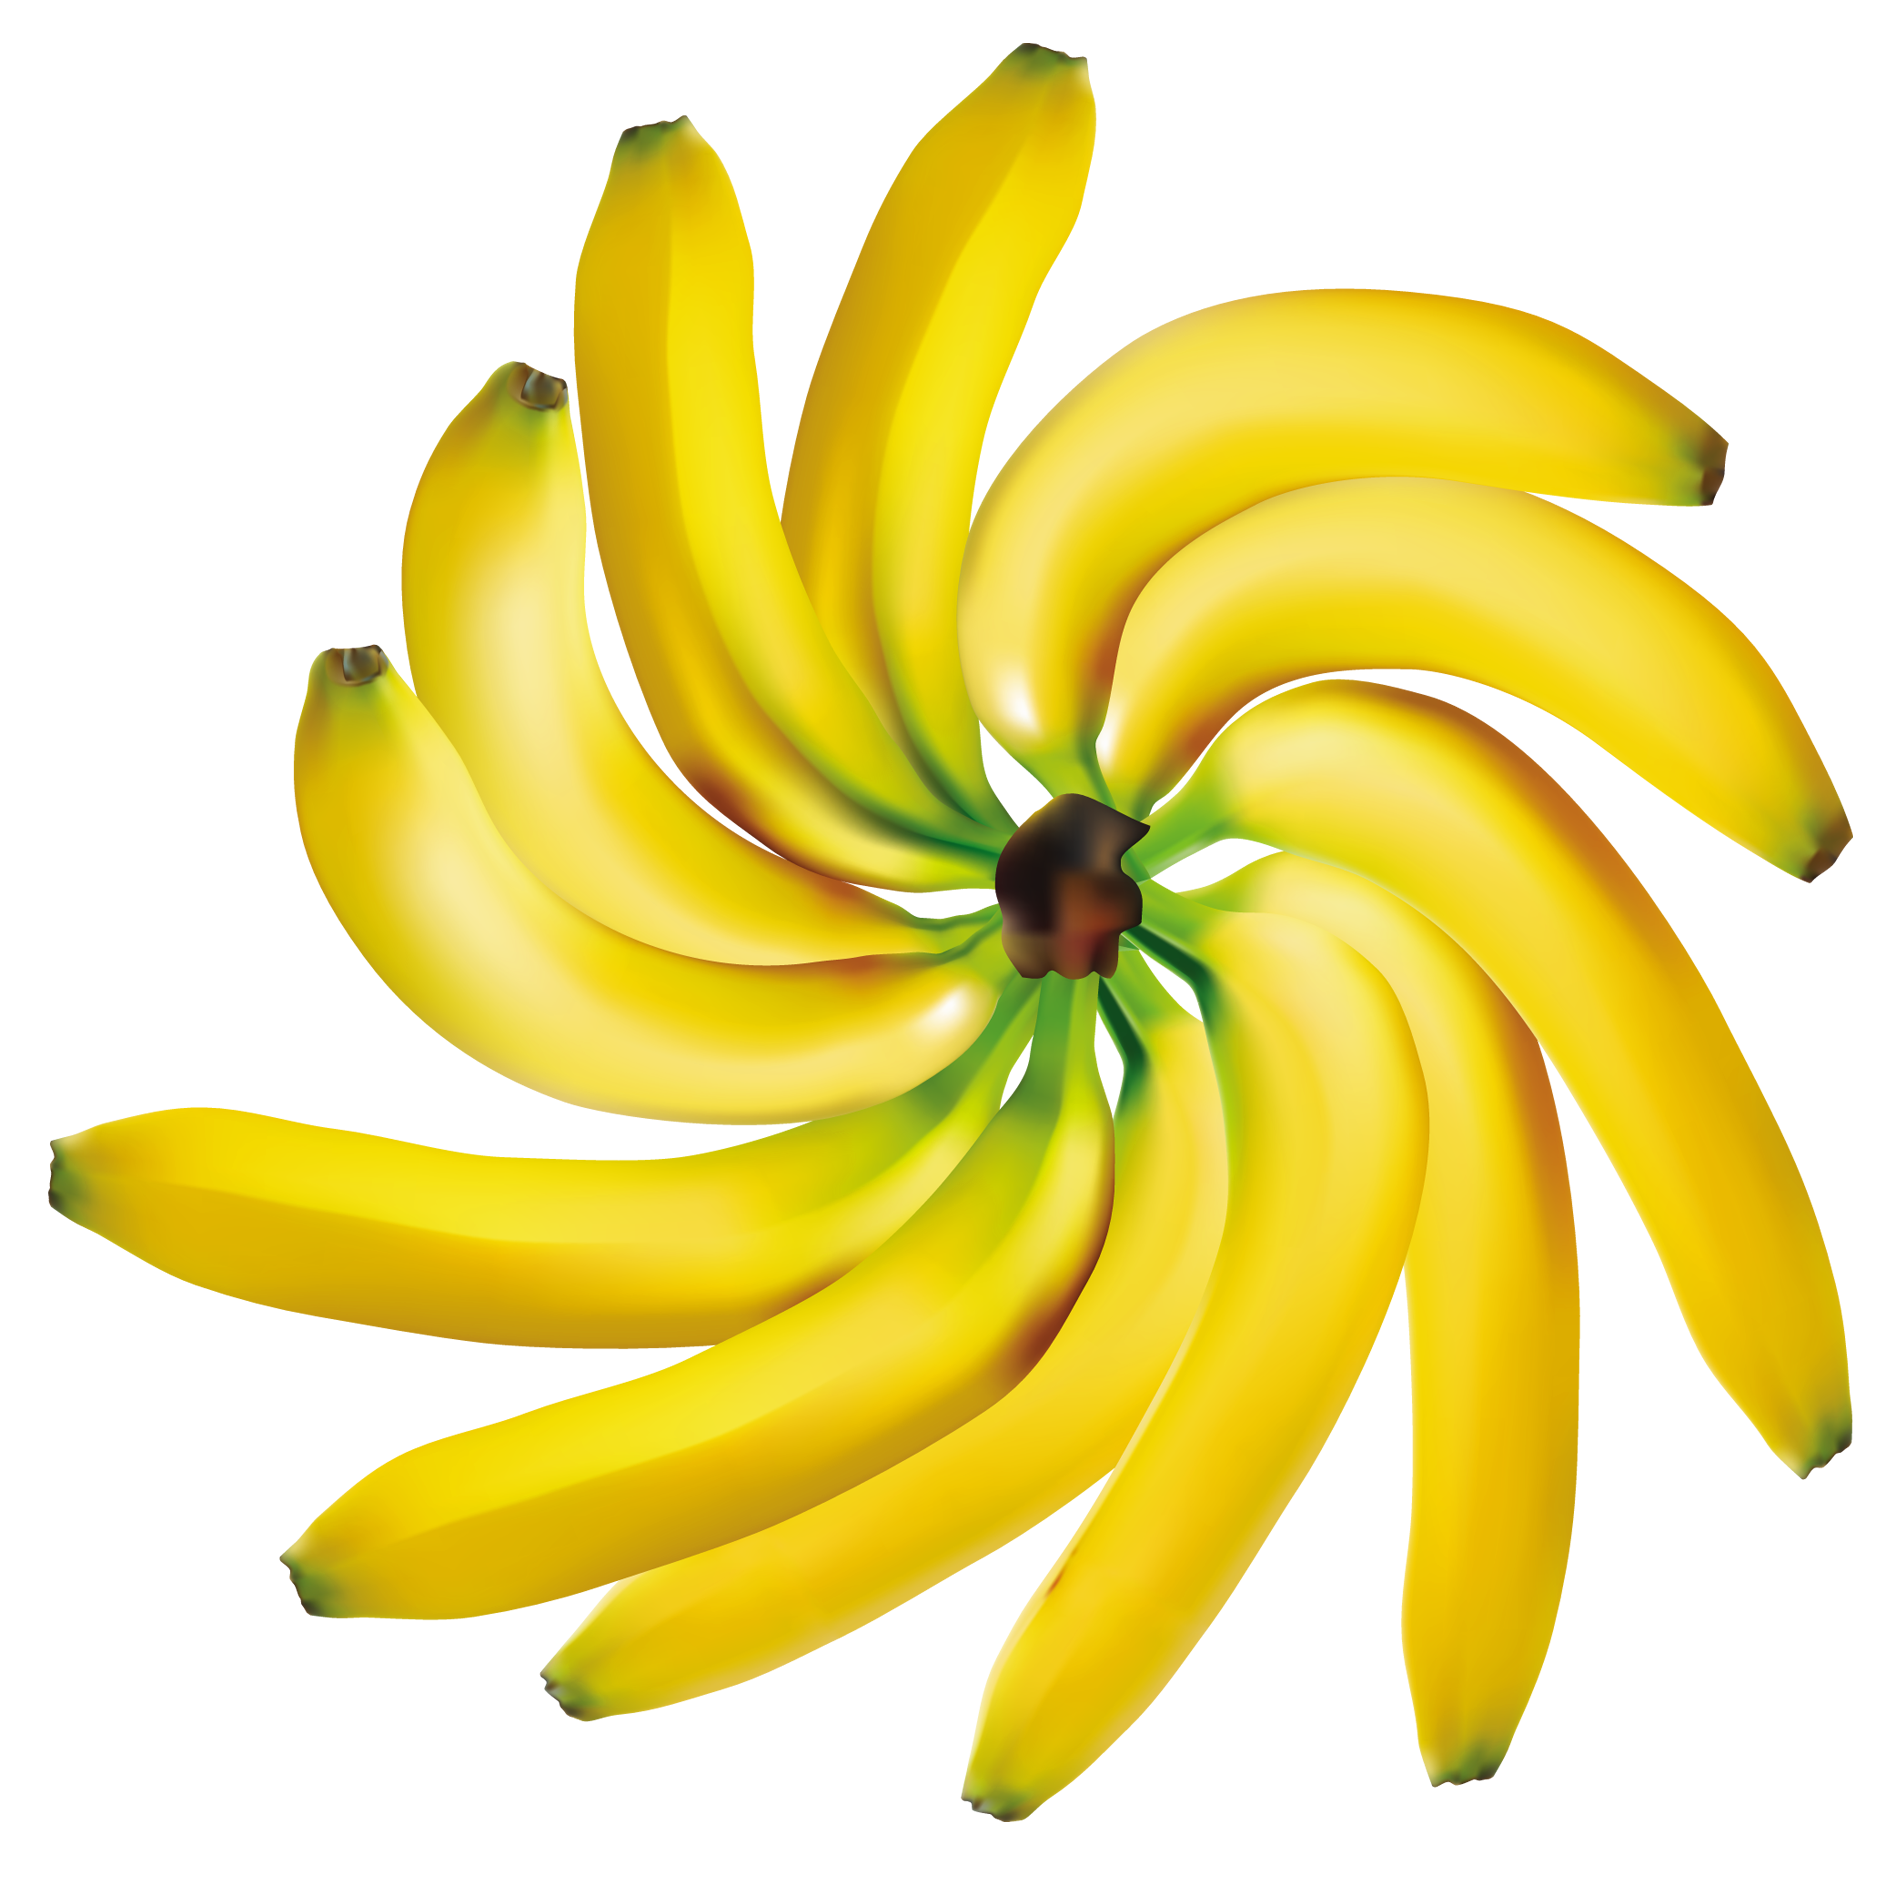 Decoration clipart yellow. Bananas png best web